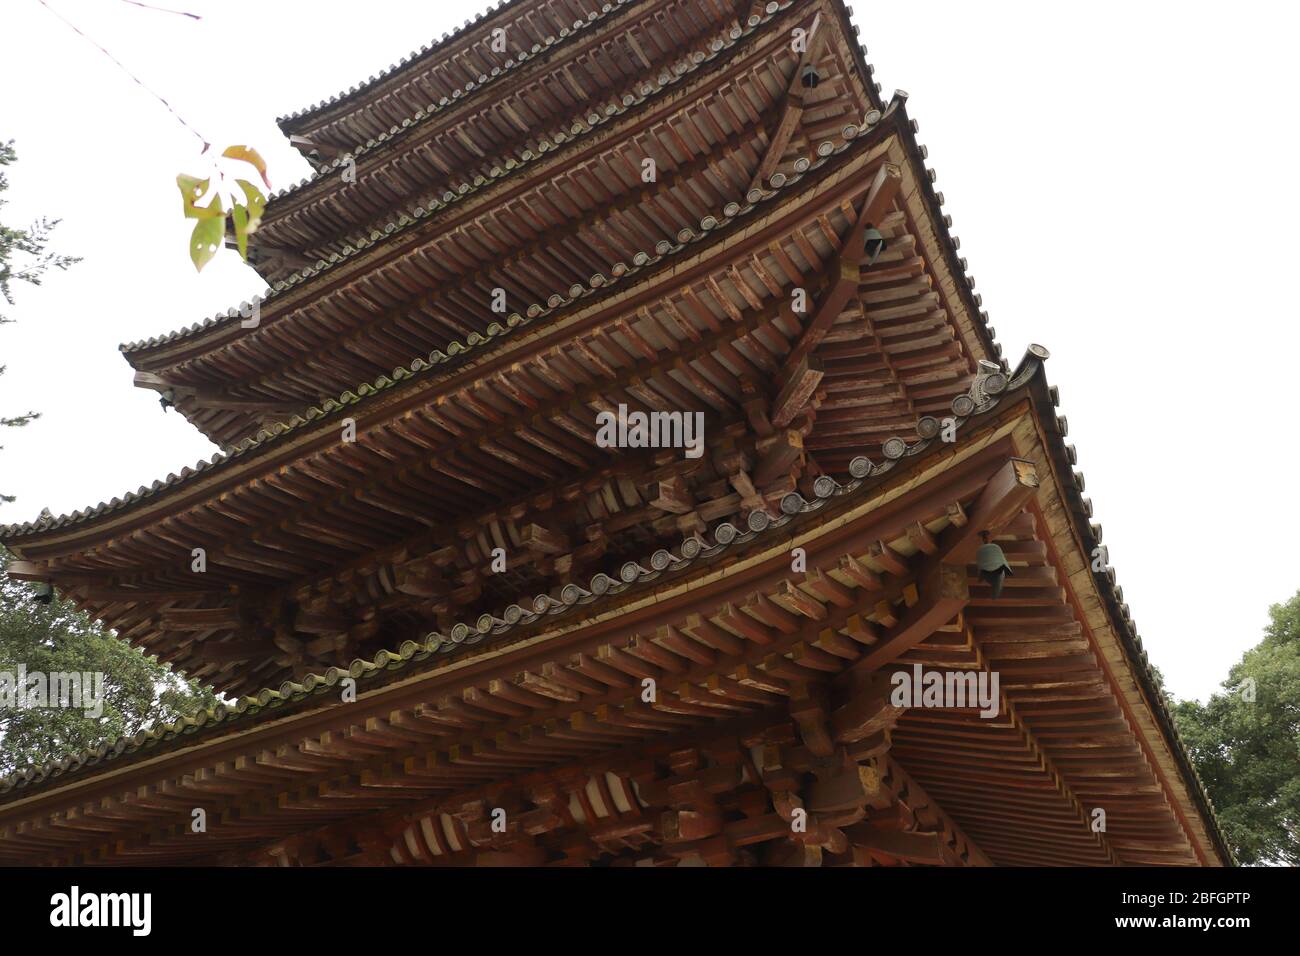 Looking up at the intricately constructed curved eaves of the oldest wooden structure, the Goju-no-to Pagoda, Daigo-ji Temple, Kyoto, Japan.Copy space Stock Photo